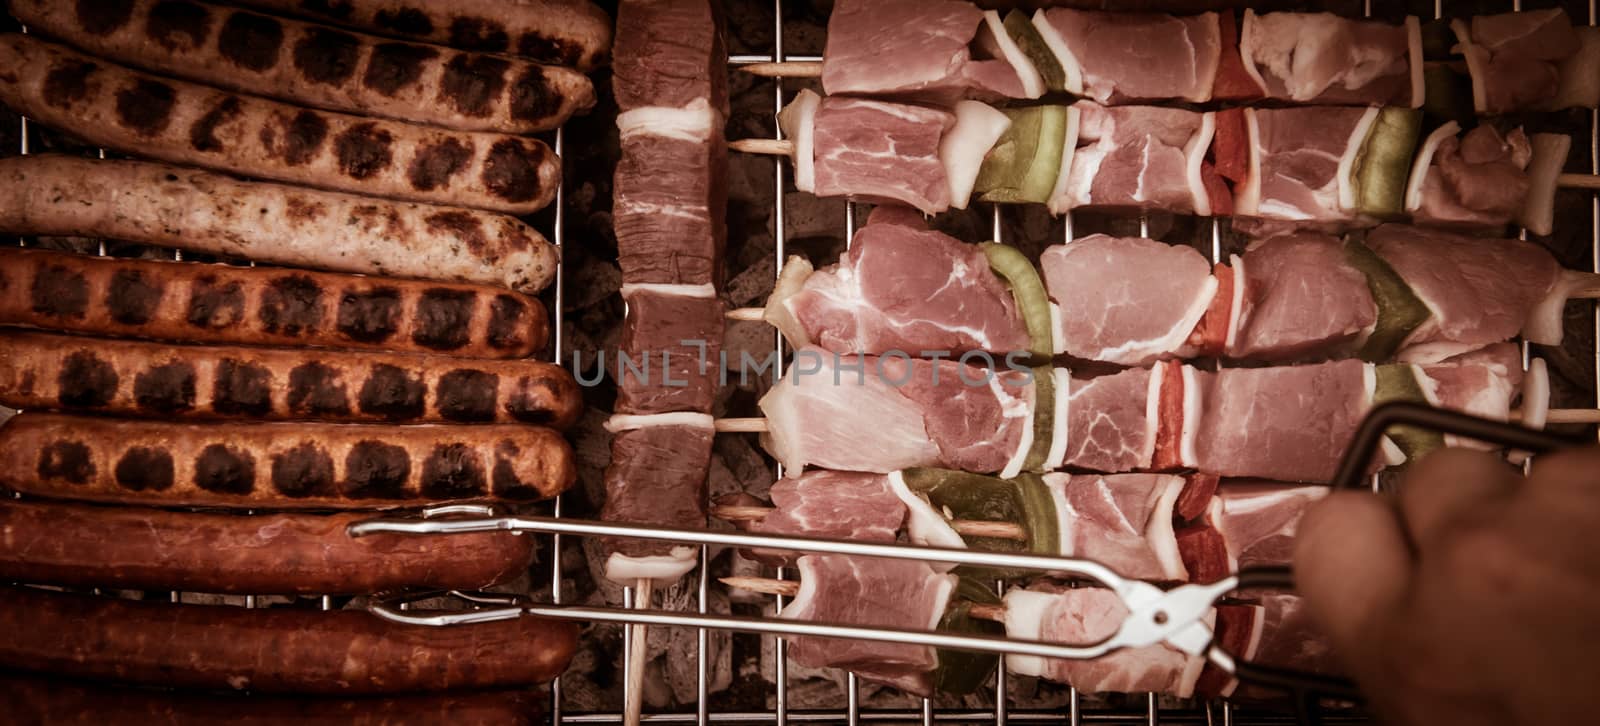 Barbecue with delicious grilled meat on grill. Meat brochettes on grill fire.